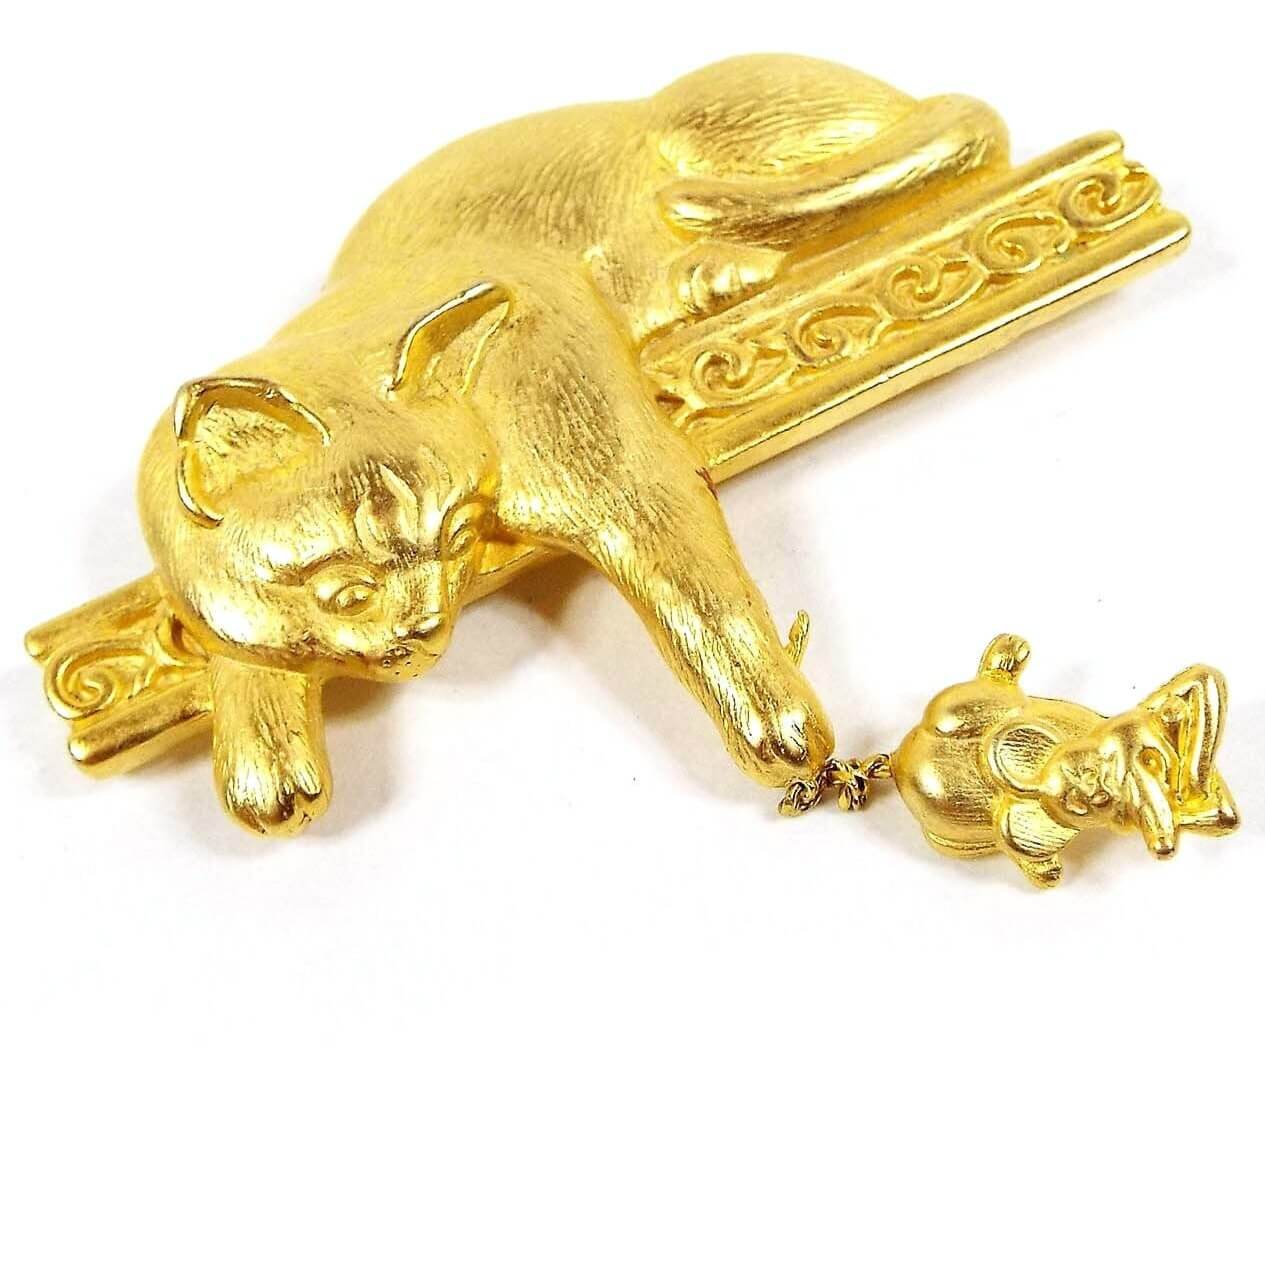 Front view of the retro vintage JJ cat and mouse brooch pin. The metal is mostly matte gold tone in color with some shiny edges. There is a cat laying across a fancy style bar with a curl design on it. The cat's paw is reaching down and holding the mouse by the tail. The mouse has a cartoon like appearance and has its arms folded in front of it like it's angry.